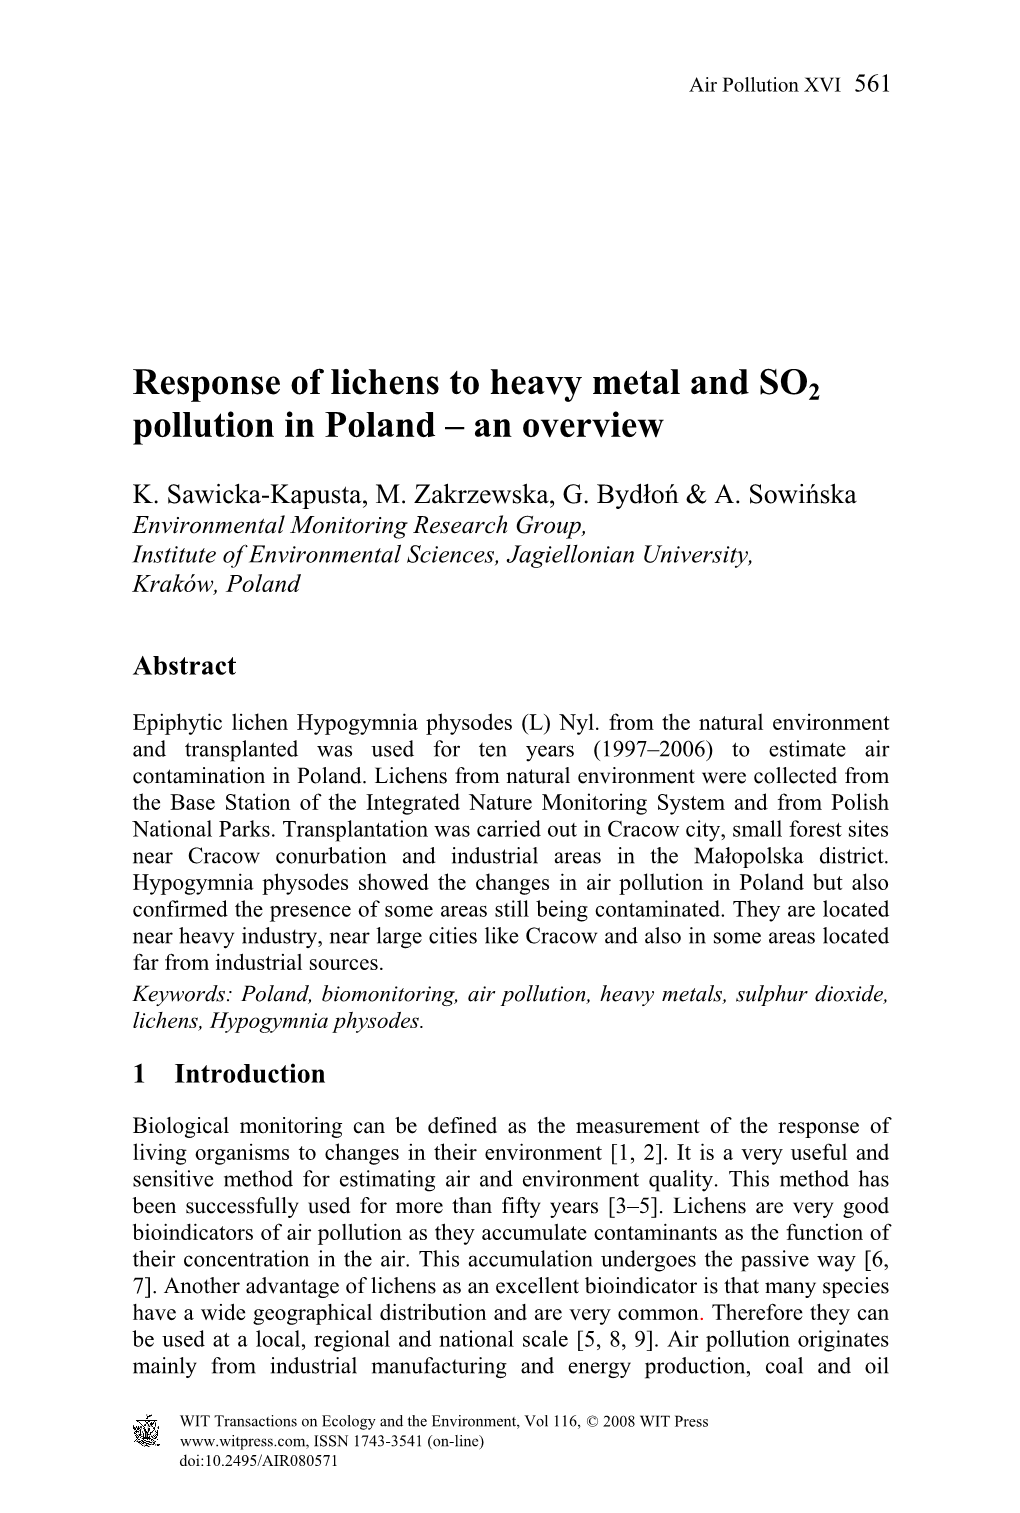 Response of Lichens to Heavy Metal and SO2 Pollution in Poland – an Overview